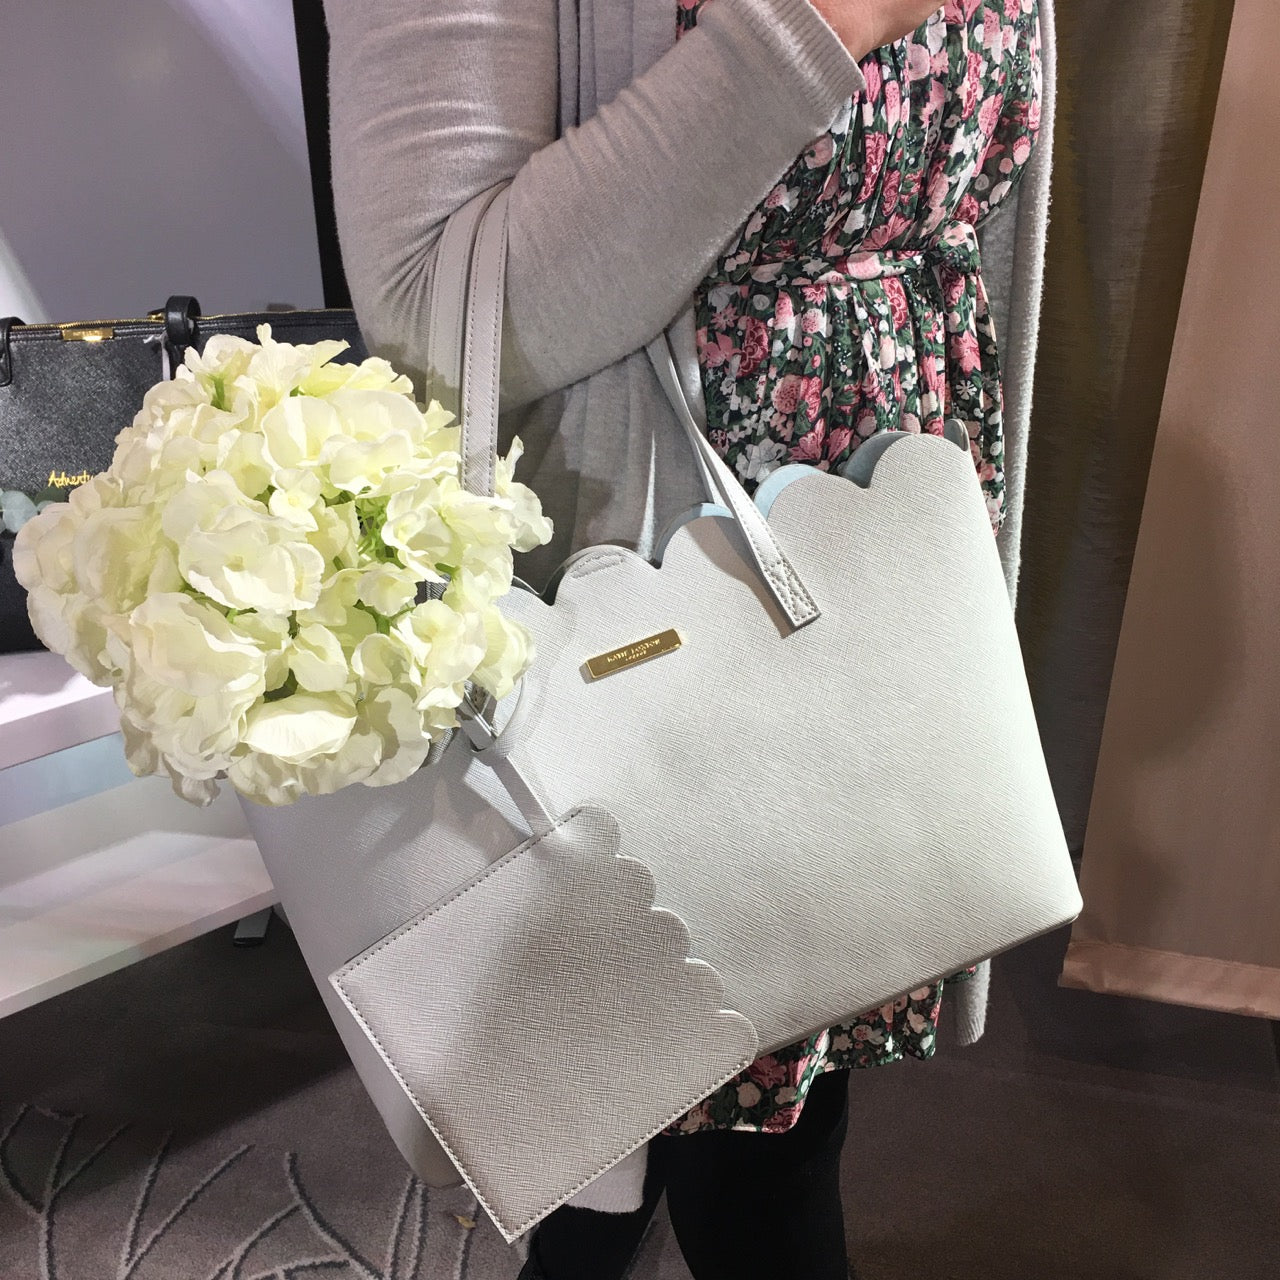 New Katie Loxton Spring Summer 2018 Collection